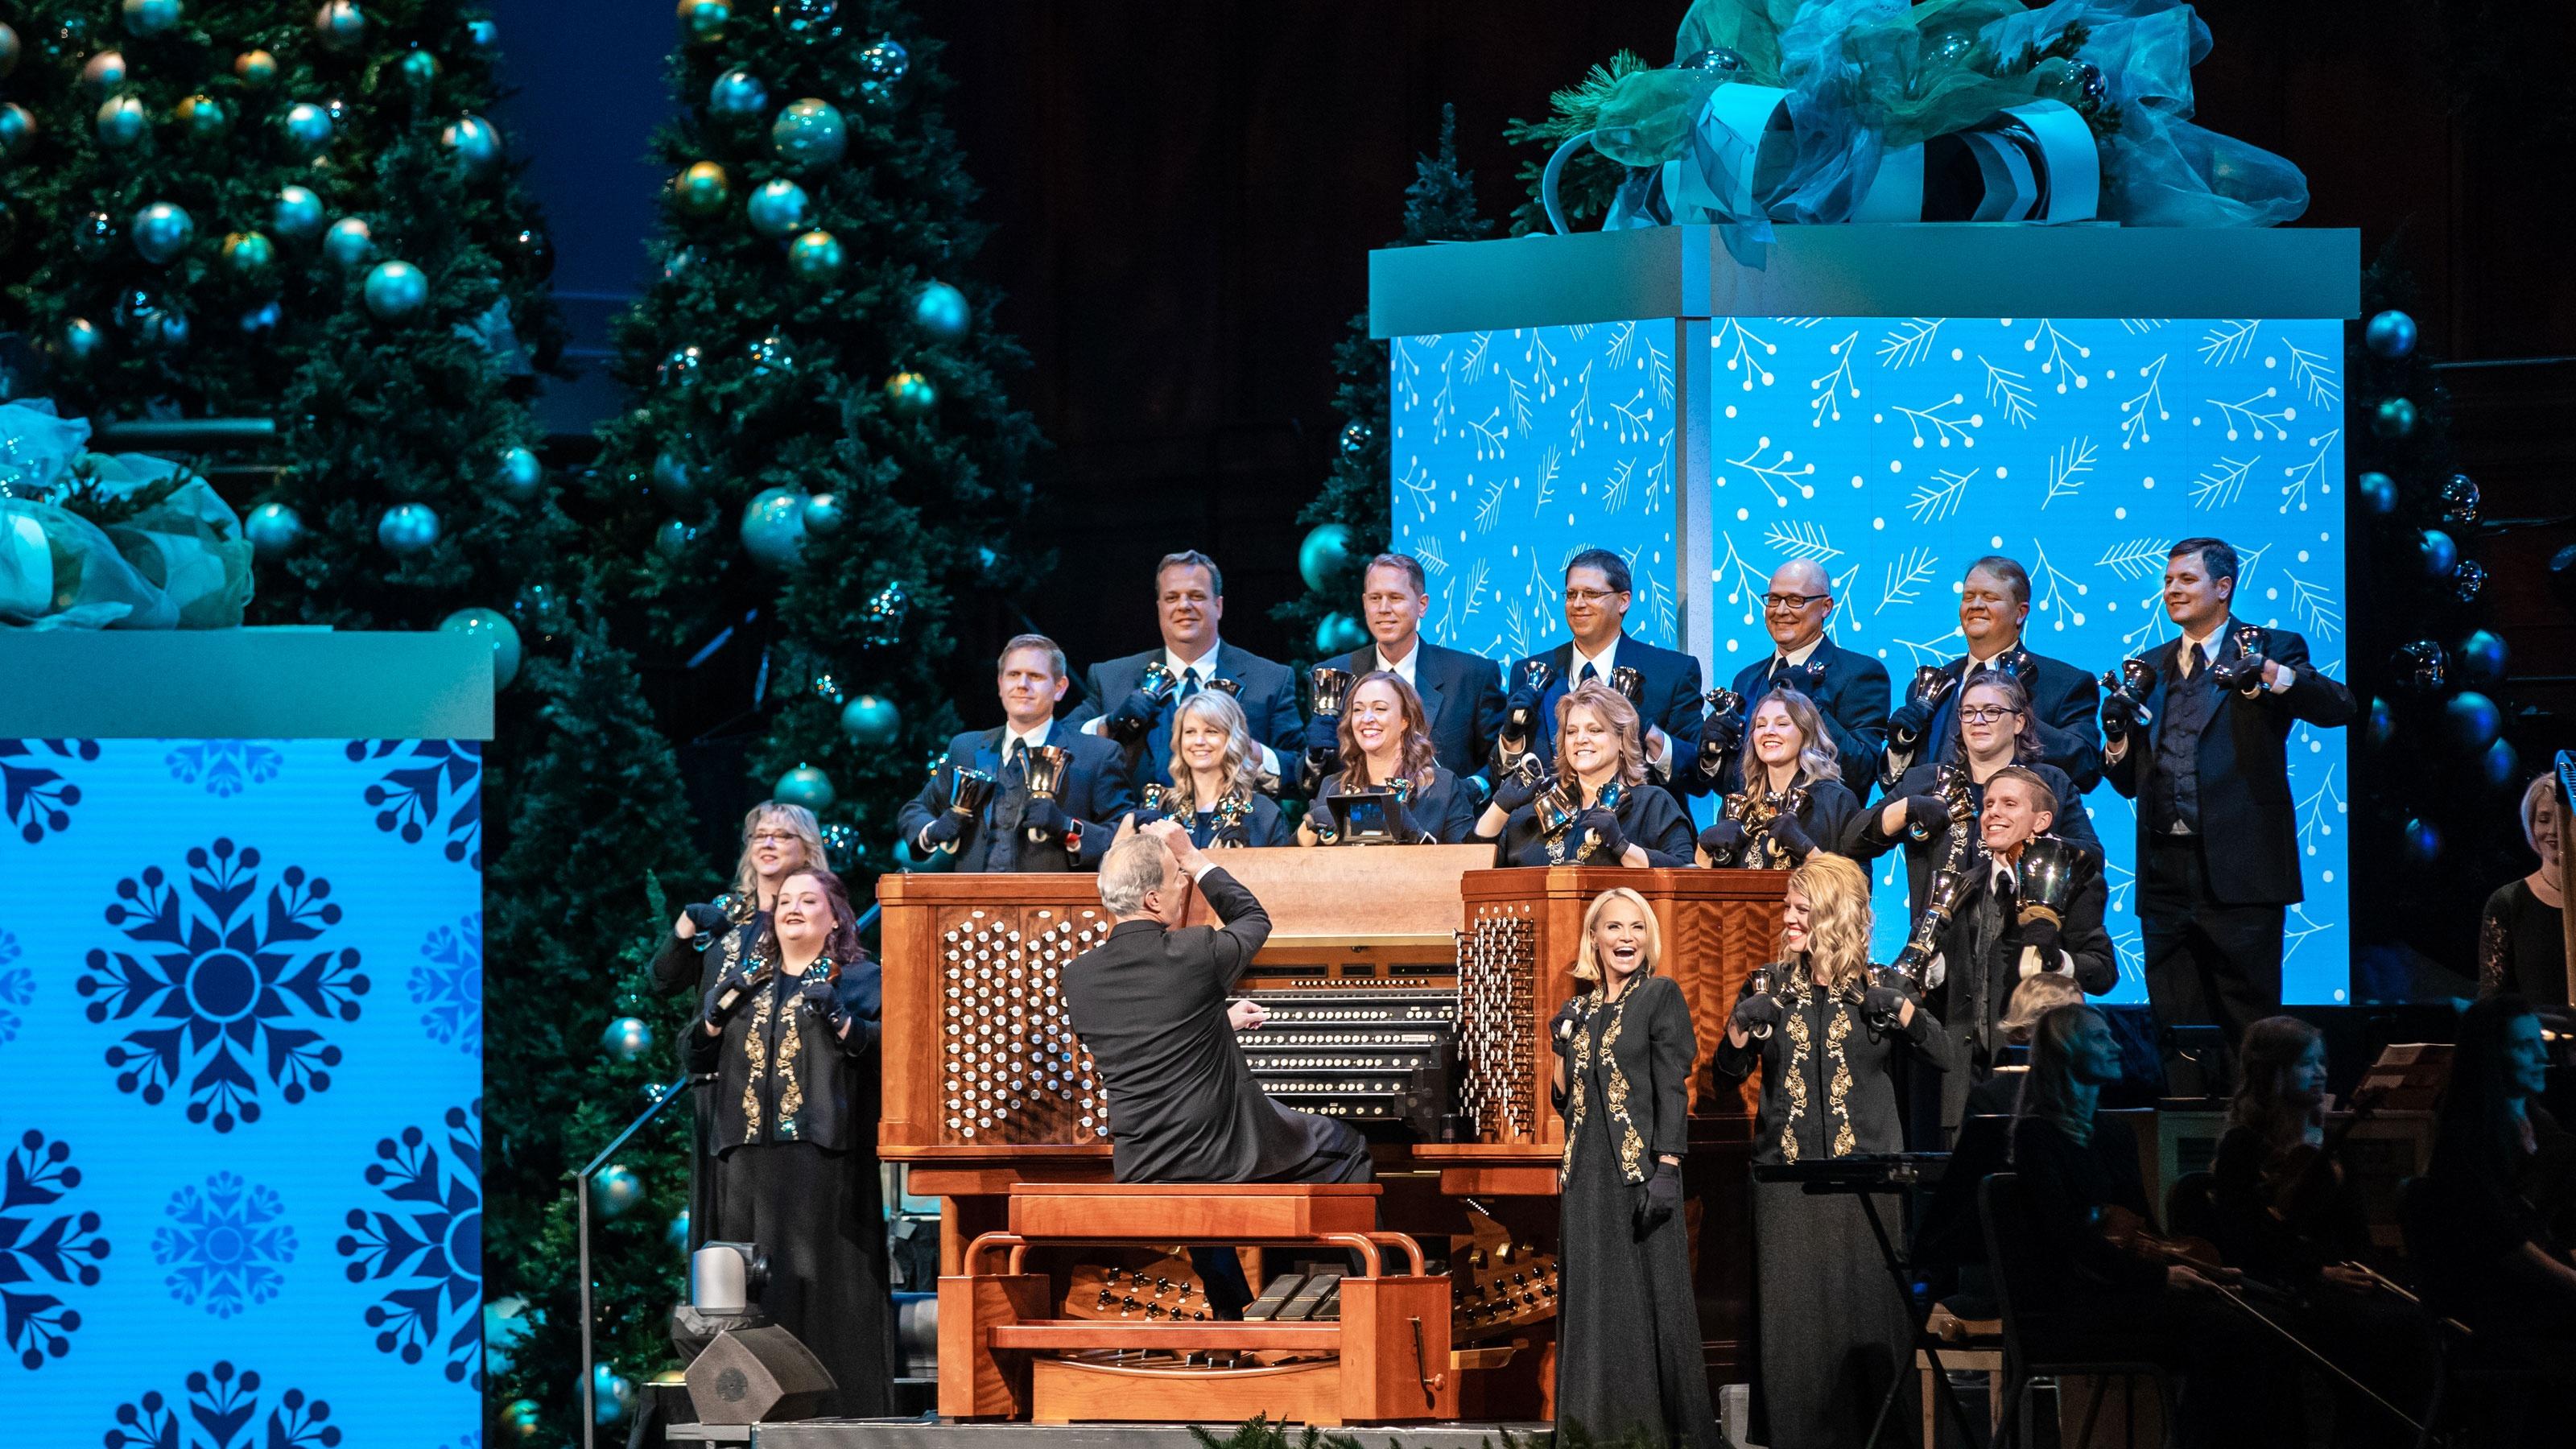 Kristin Chenoweth sings in front of the organist and musicians holding jingle bells.